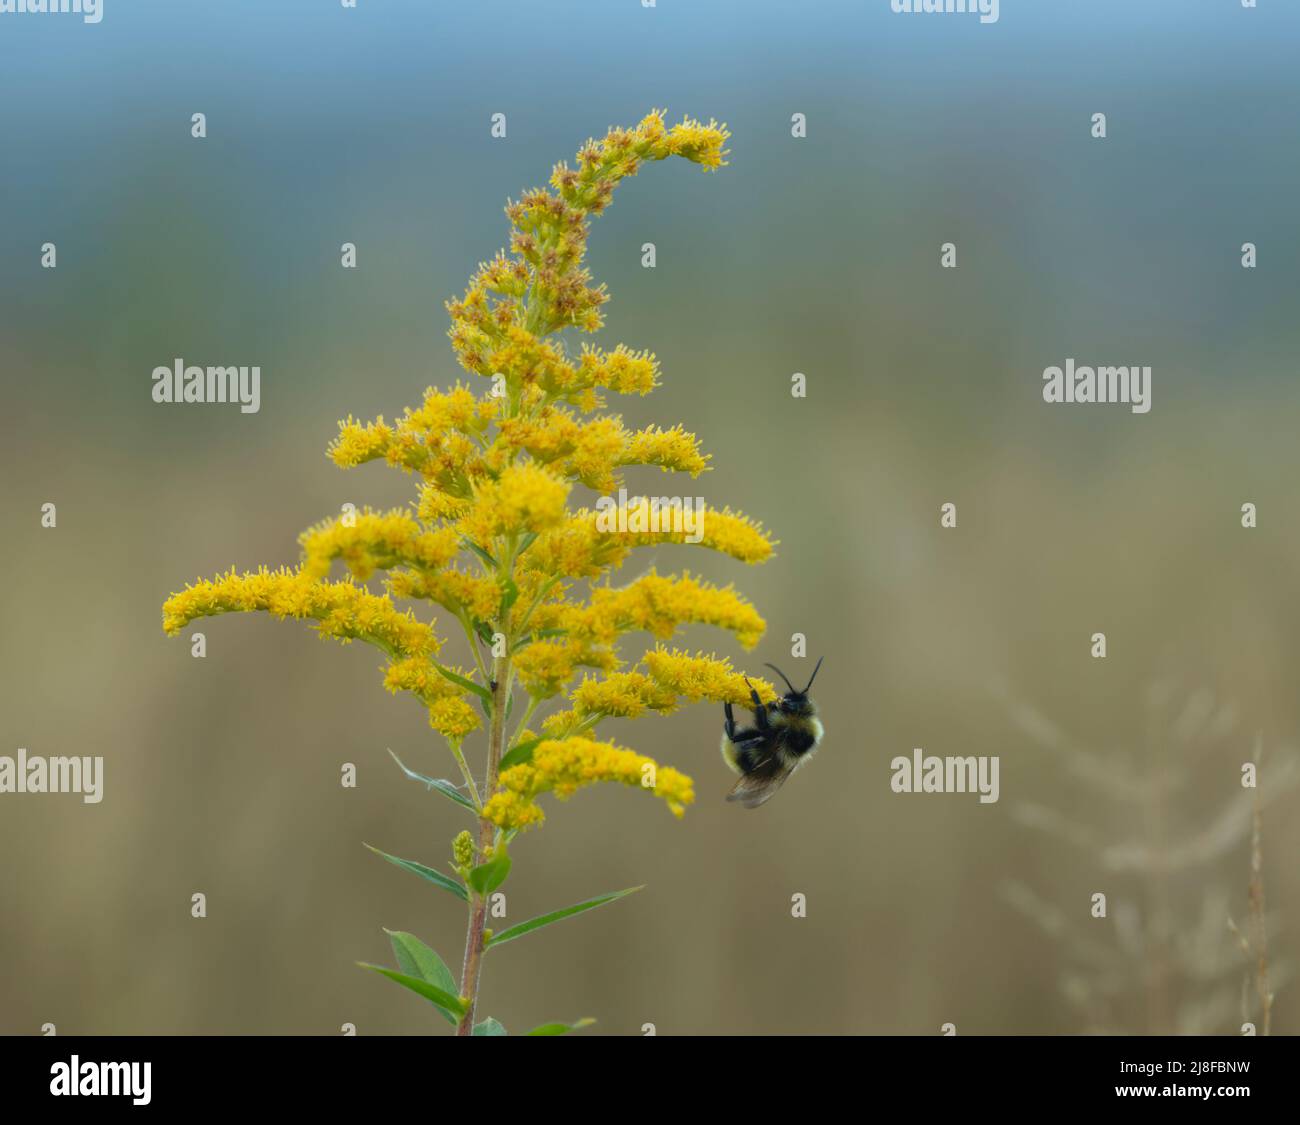 Bumble bee pollinating on blooming Solidago plant photographed with shallow depth of field Stock Photo